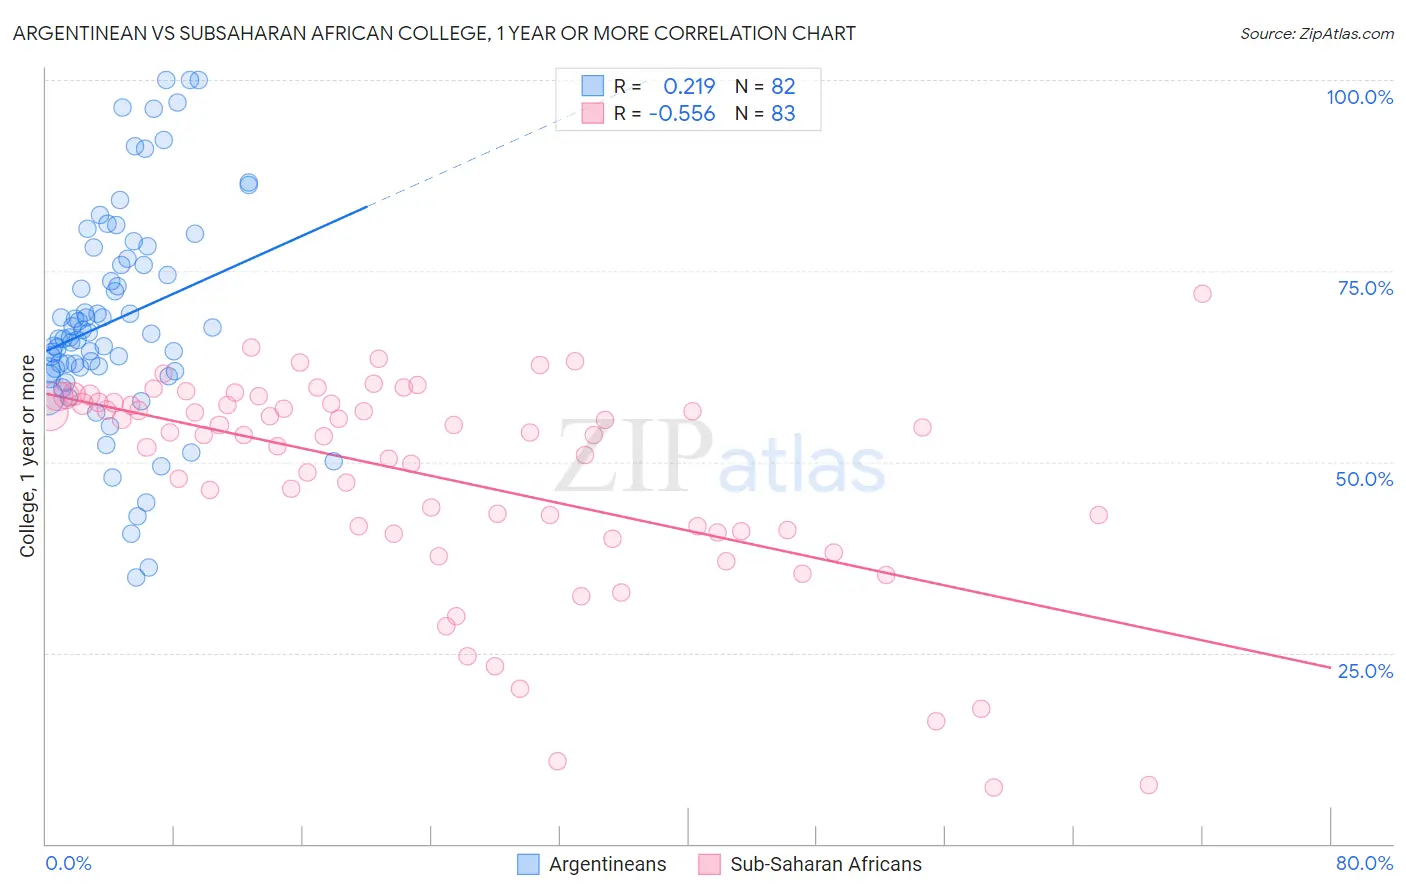 Argentinean vs Subsaharan African College, 1 year or more